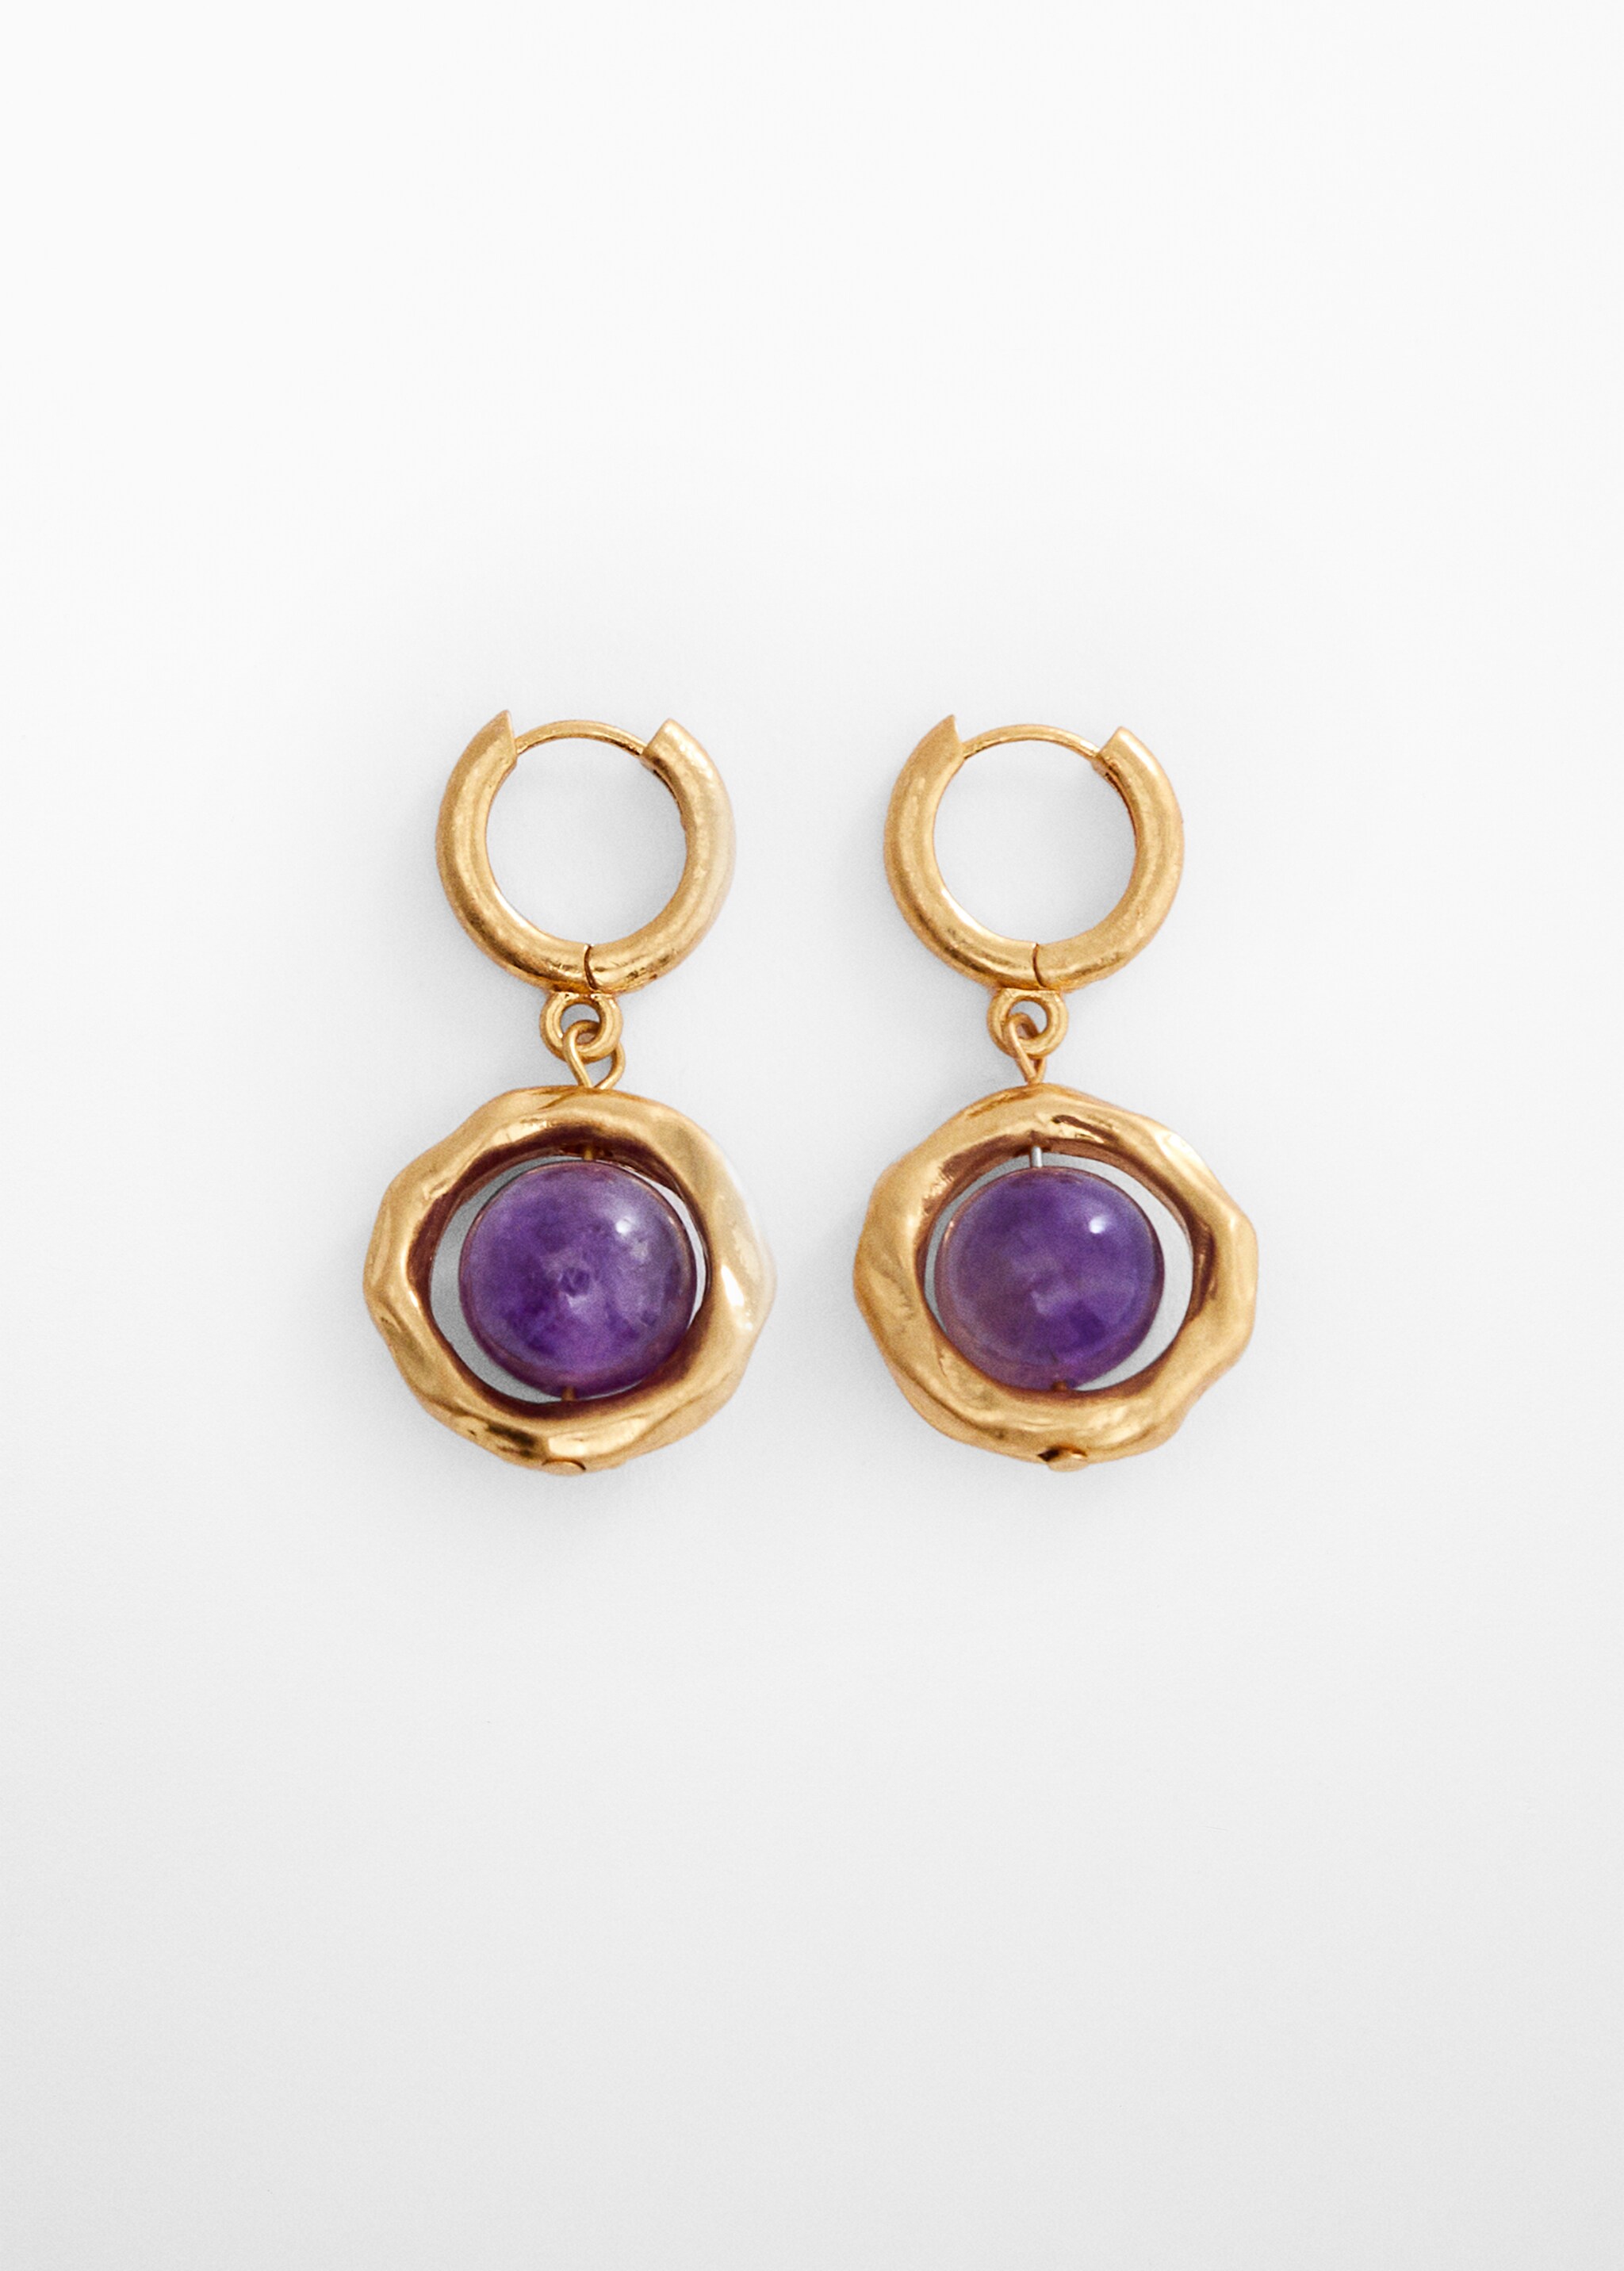 Semi-precious stones earrings - Article without model